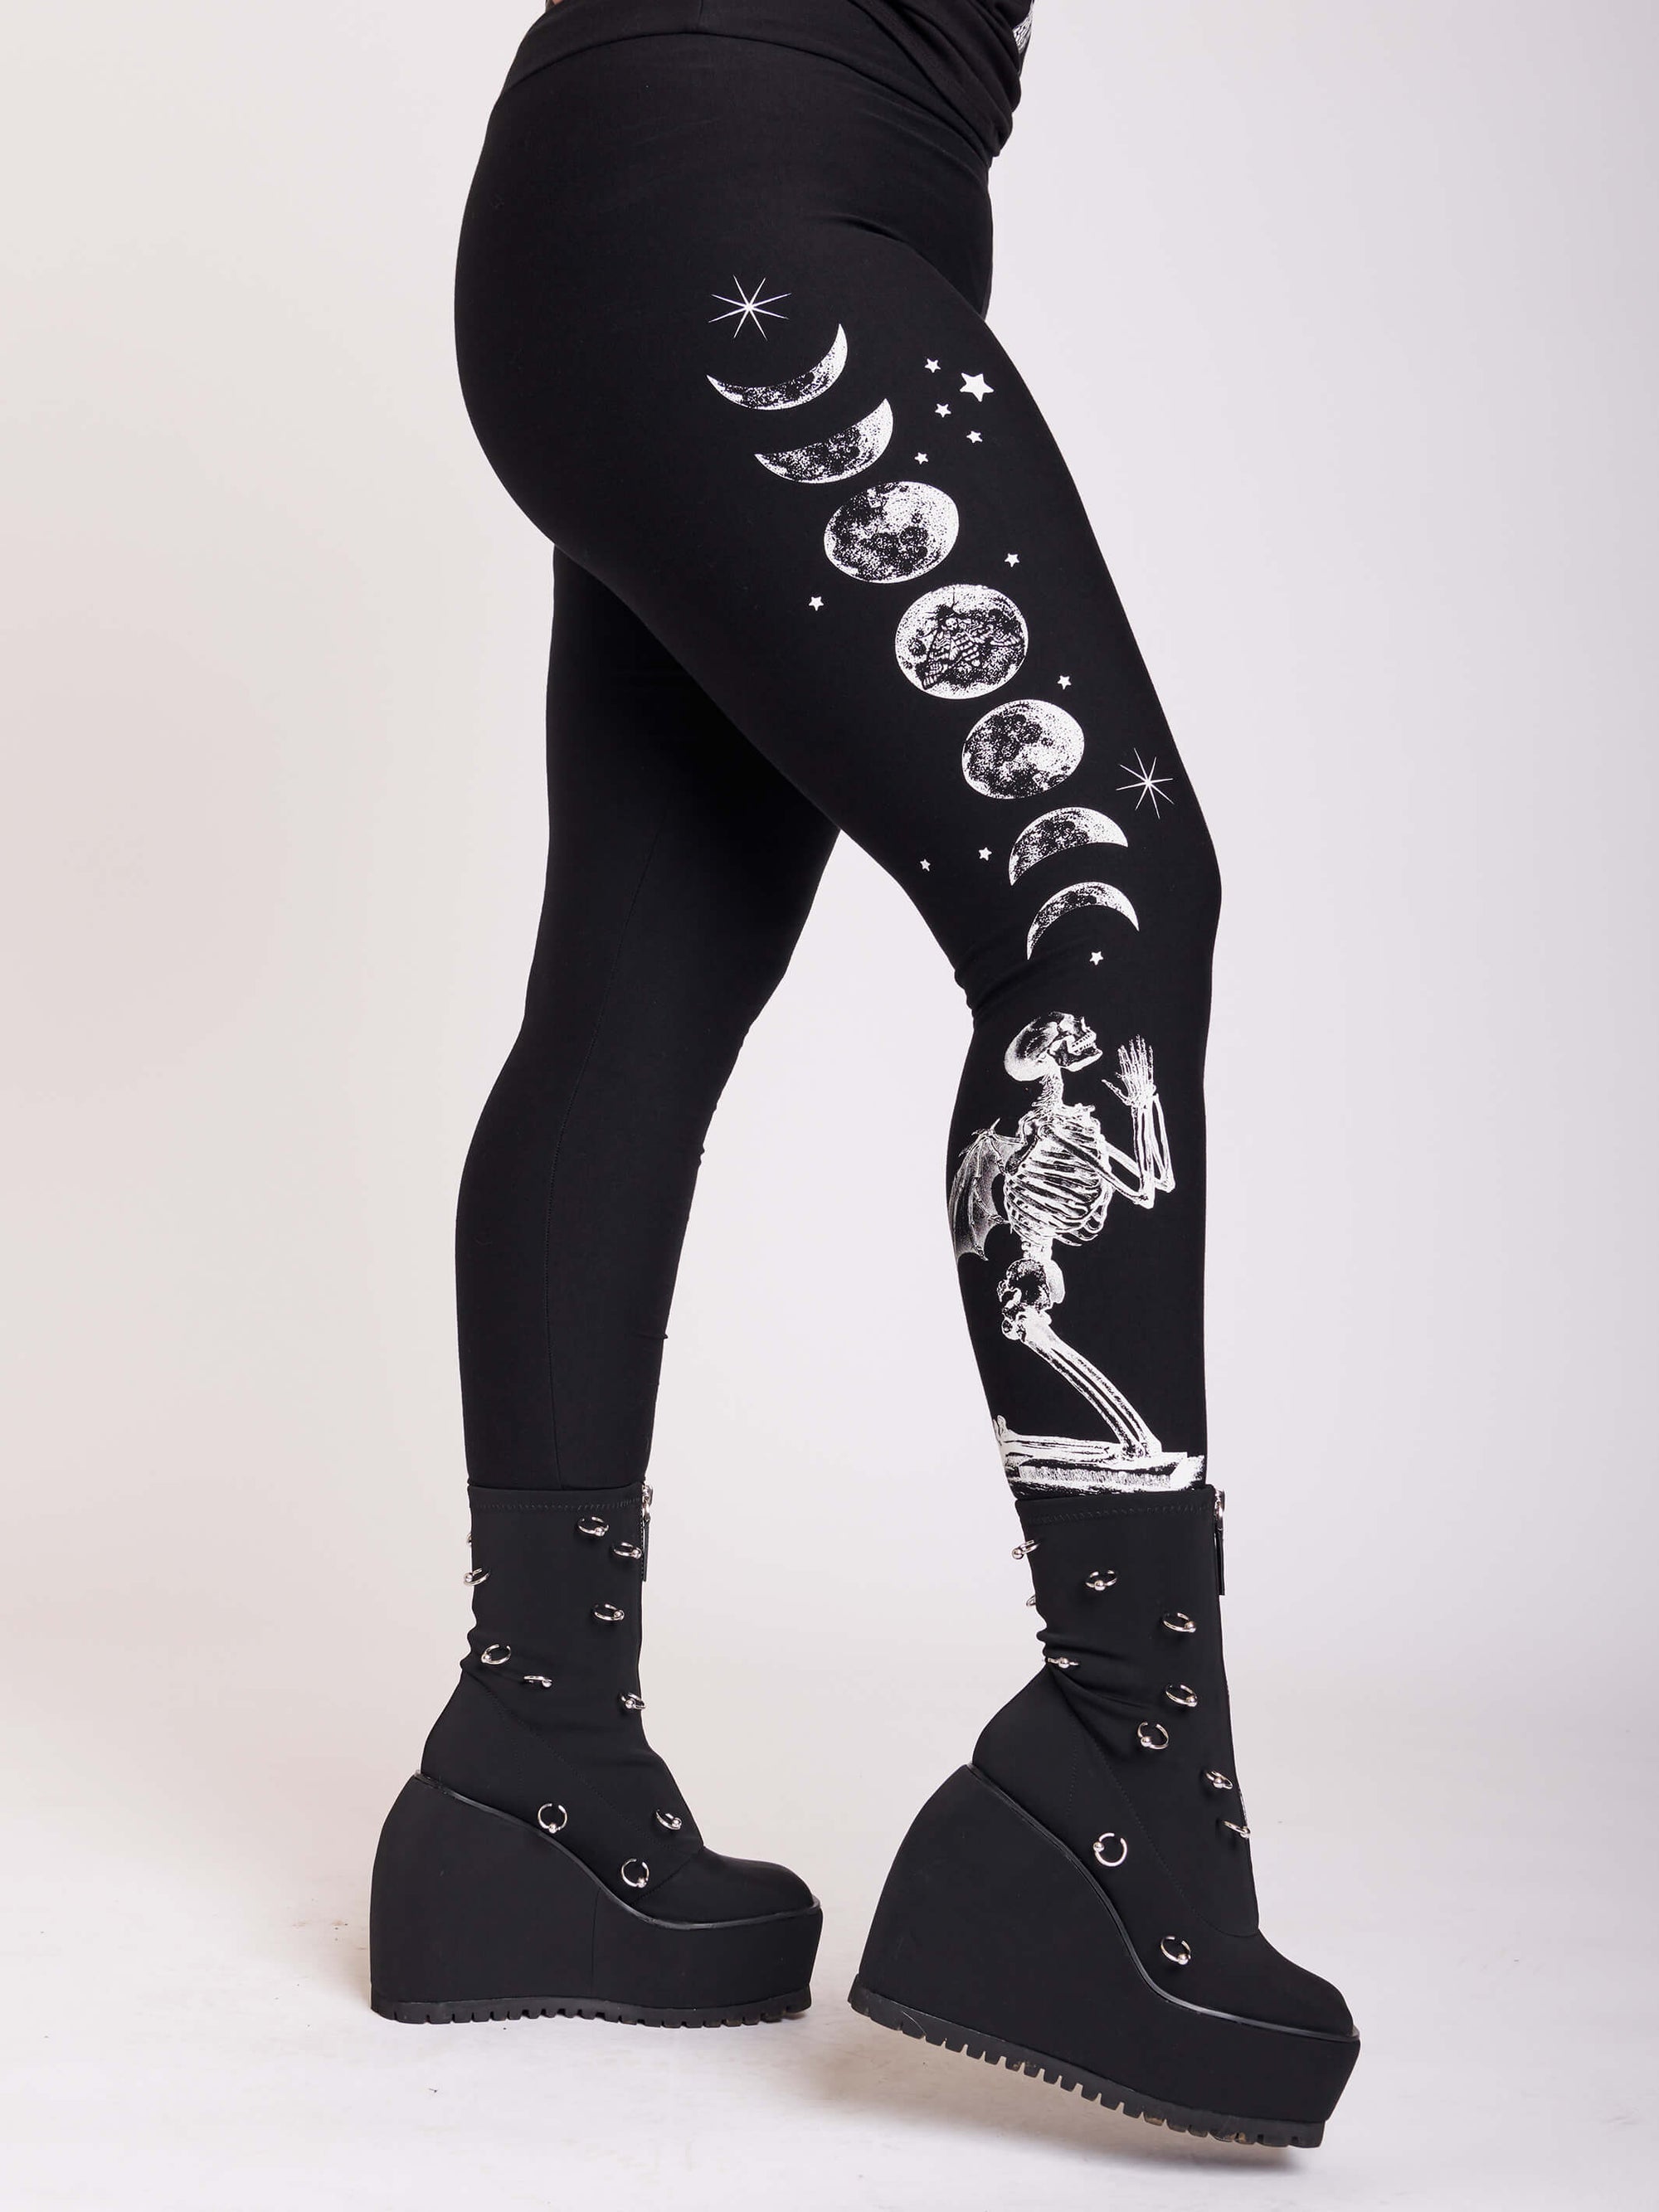 BLACK LEGGING WITH WHITE GRAPHIC FEATURING PRAYING SKELTON AND MOON PHASE